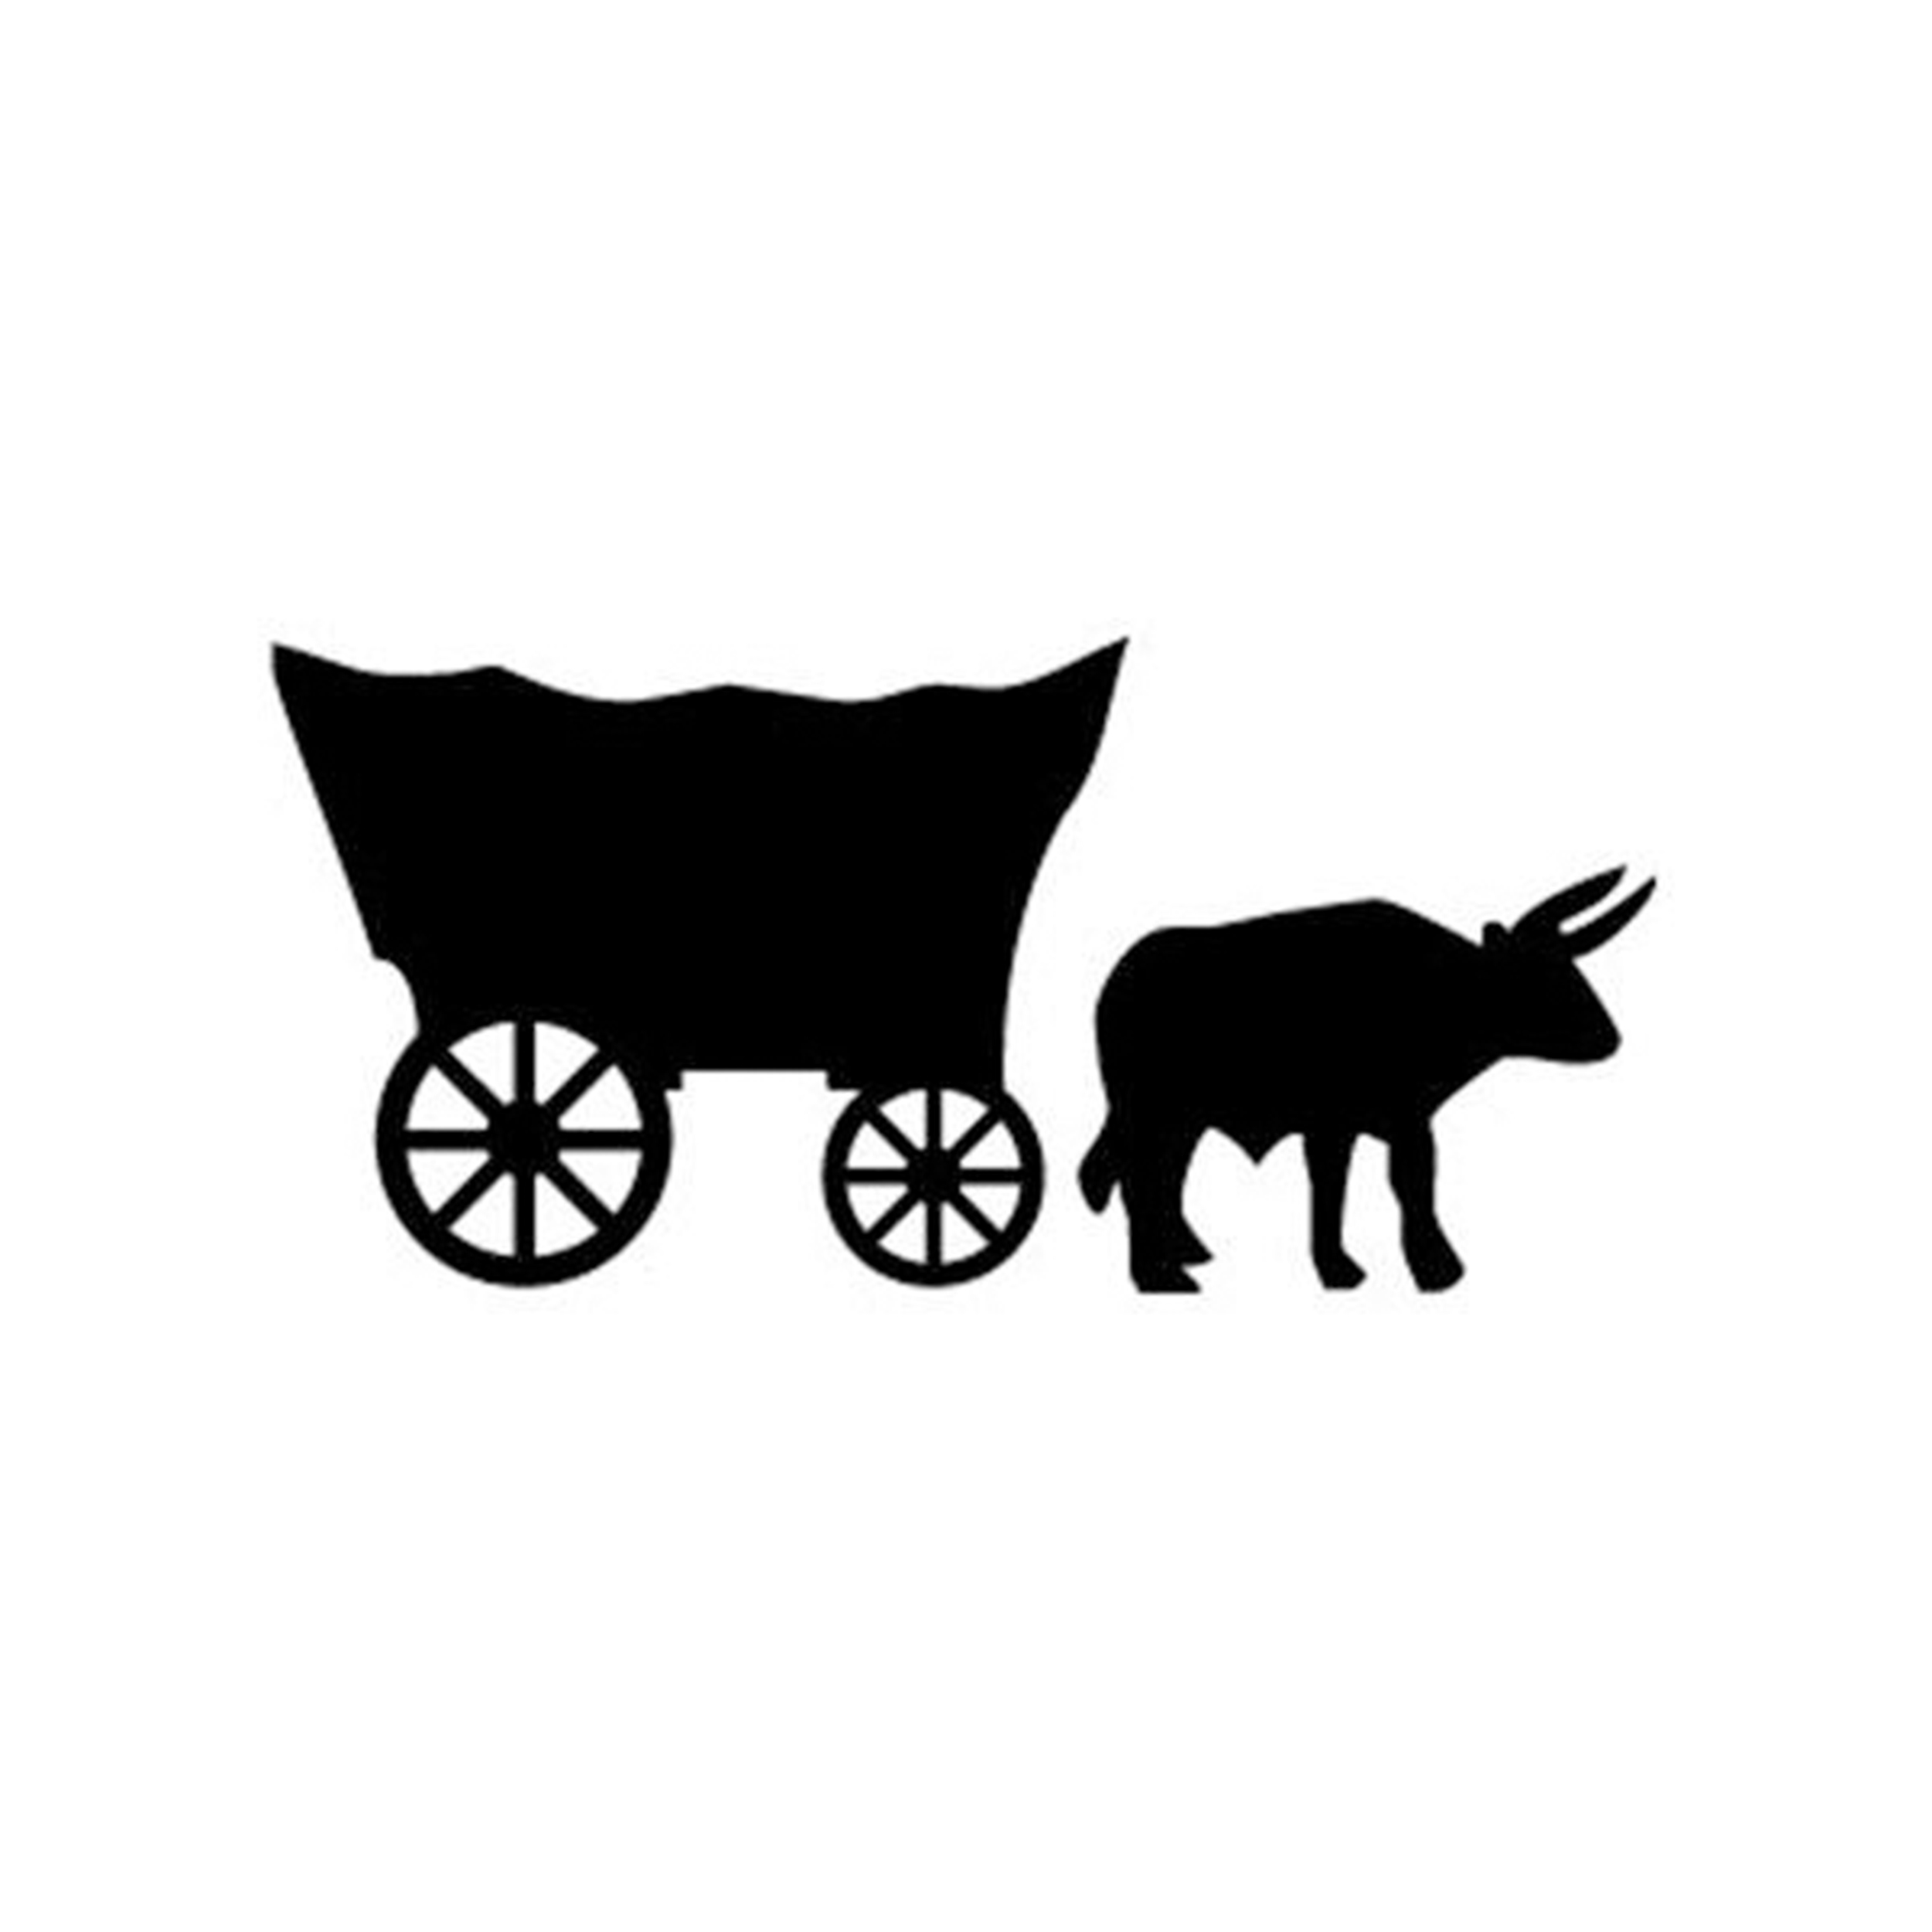 Woodworking Project Paper Plan To Build Wagon And Ox Shadow